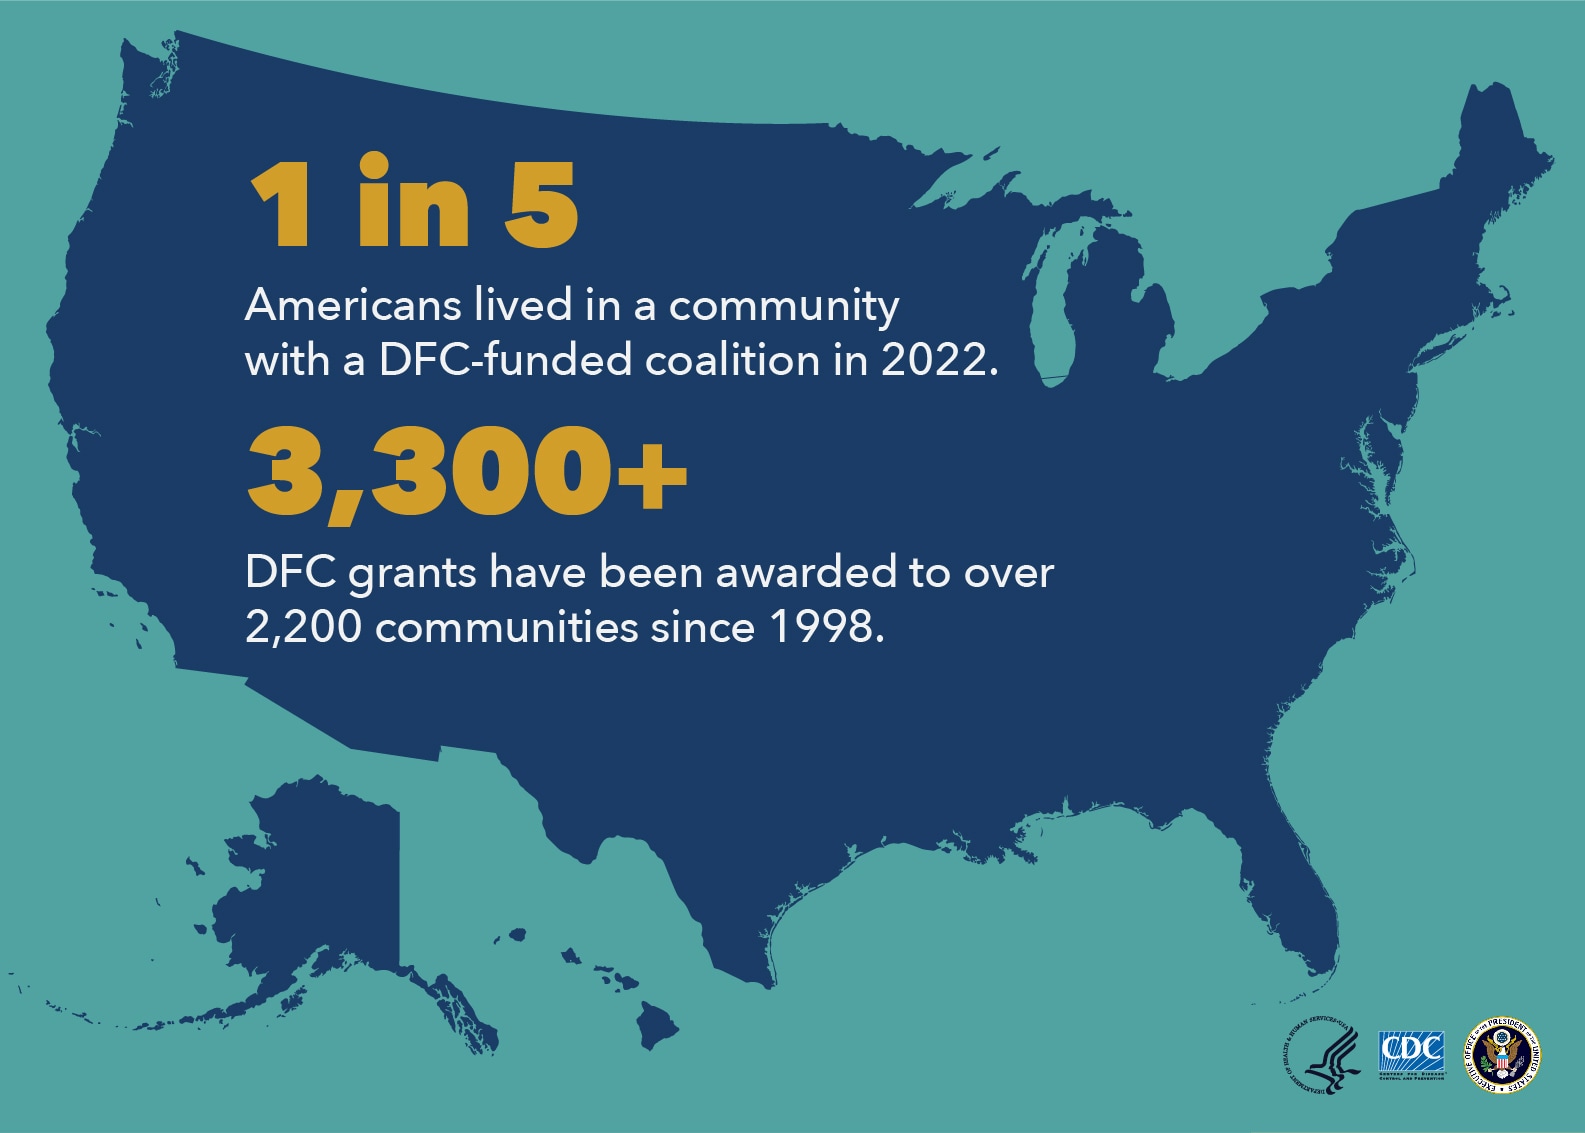 1 in 5 Americans lived in a community with a DFC-funded coalition in 2022. 3,300+ DFC grants have been awarded to over 2,200 communities since 1998.